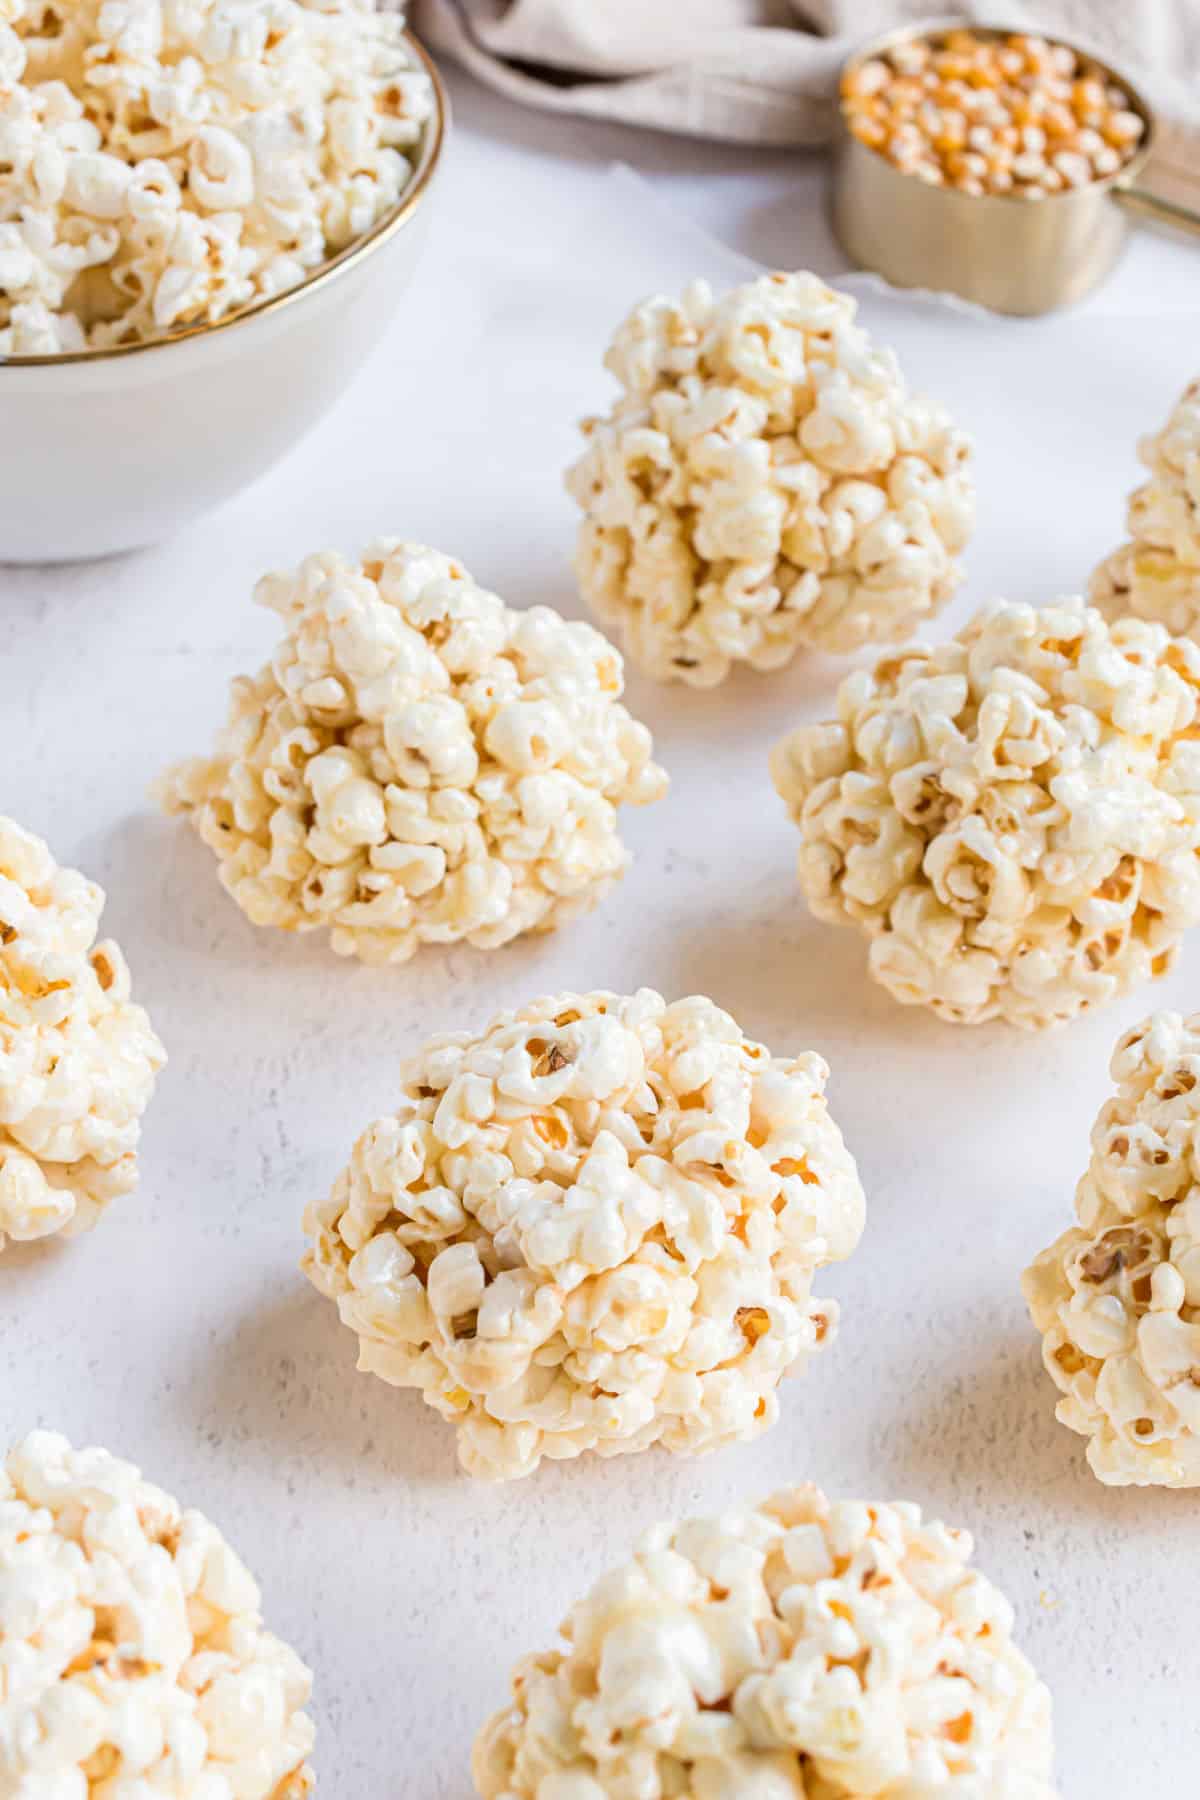 Popcorn balls shaped on a piece of parchment paper.